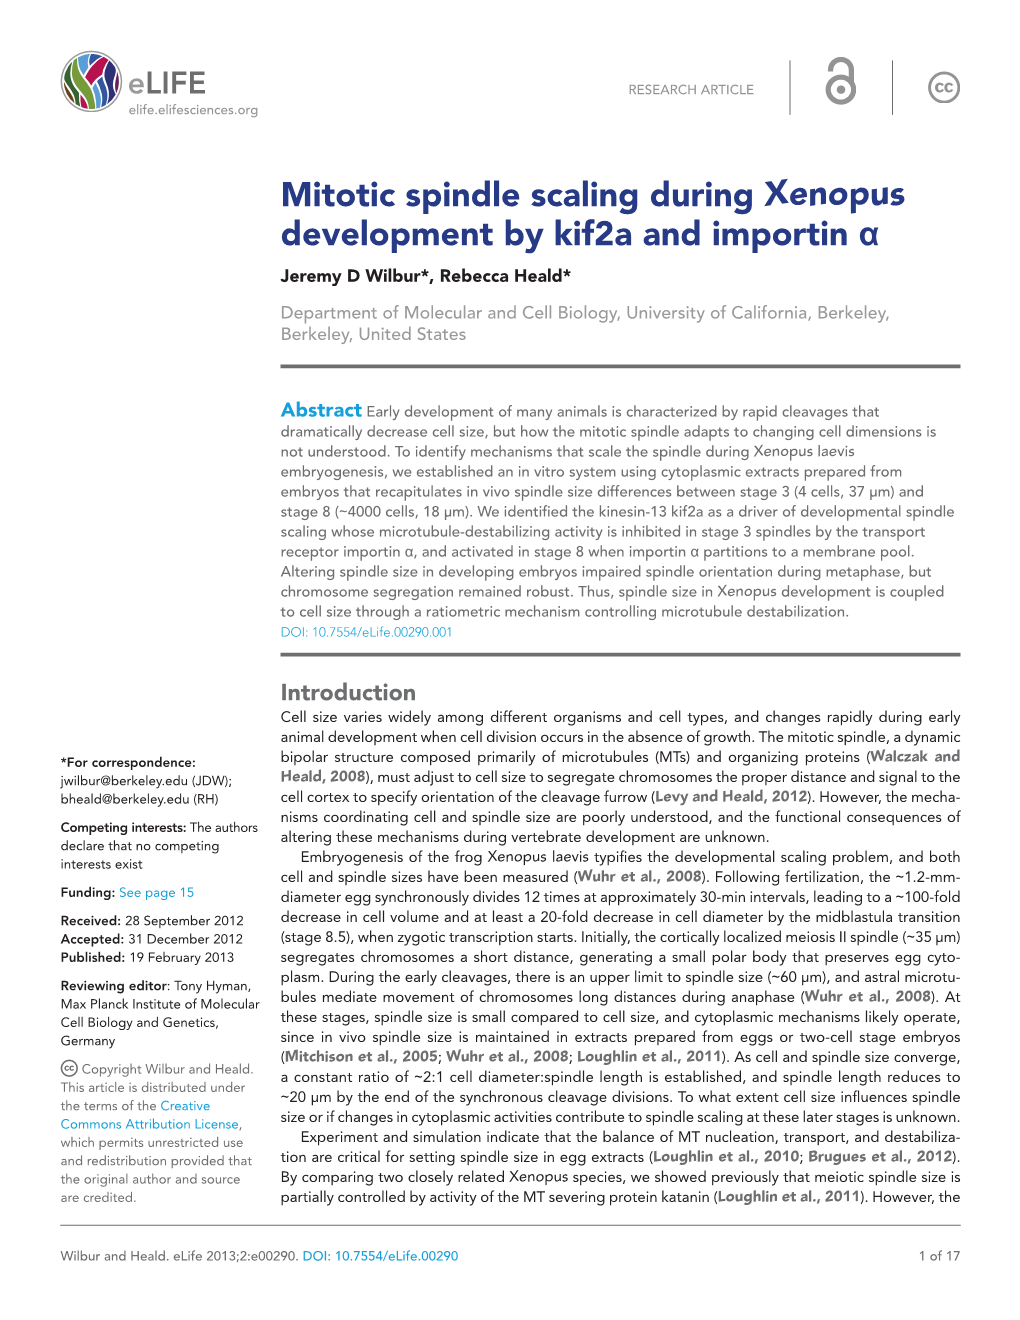 Mitotic Spindle Scaling During Xenopus Development by Kif2a and Importin Α Jeremy D Wilbur*, Rebecca Heald*